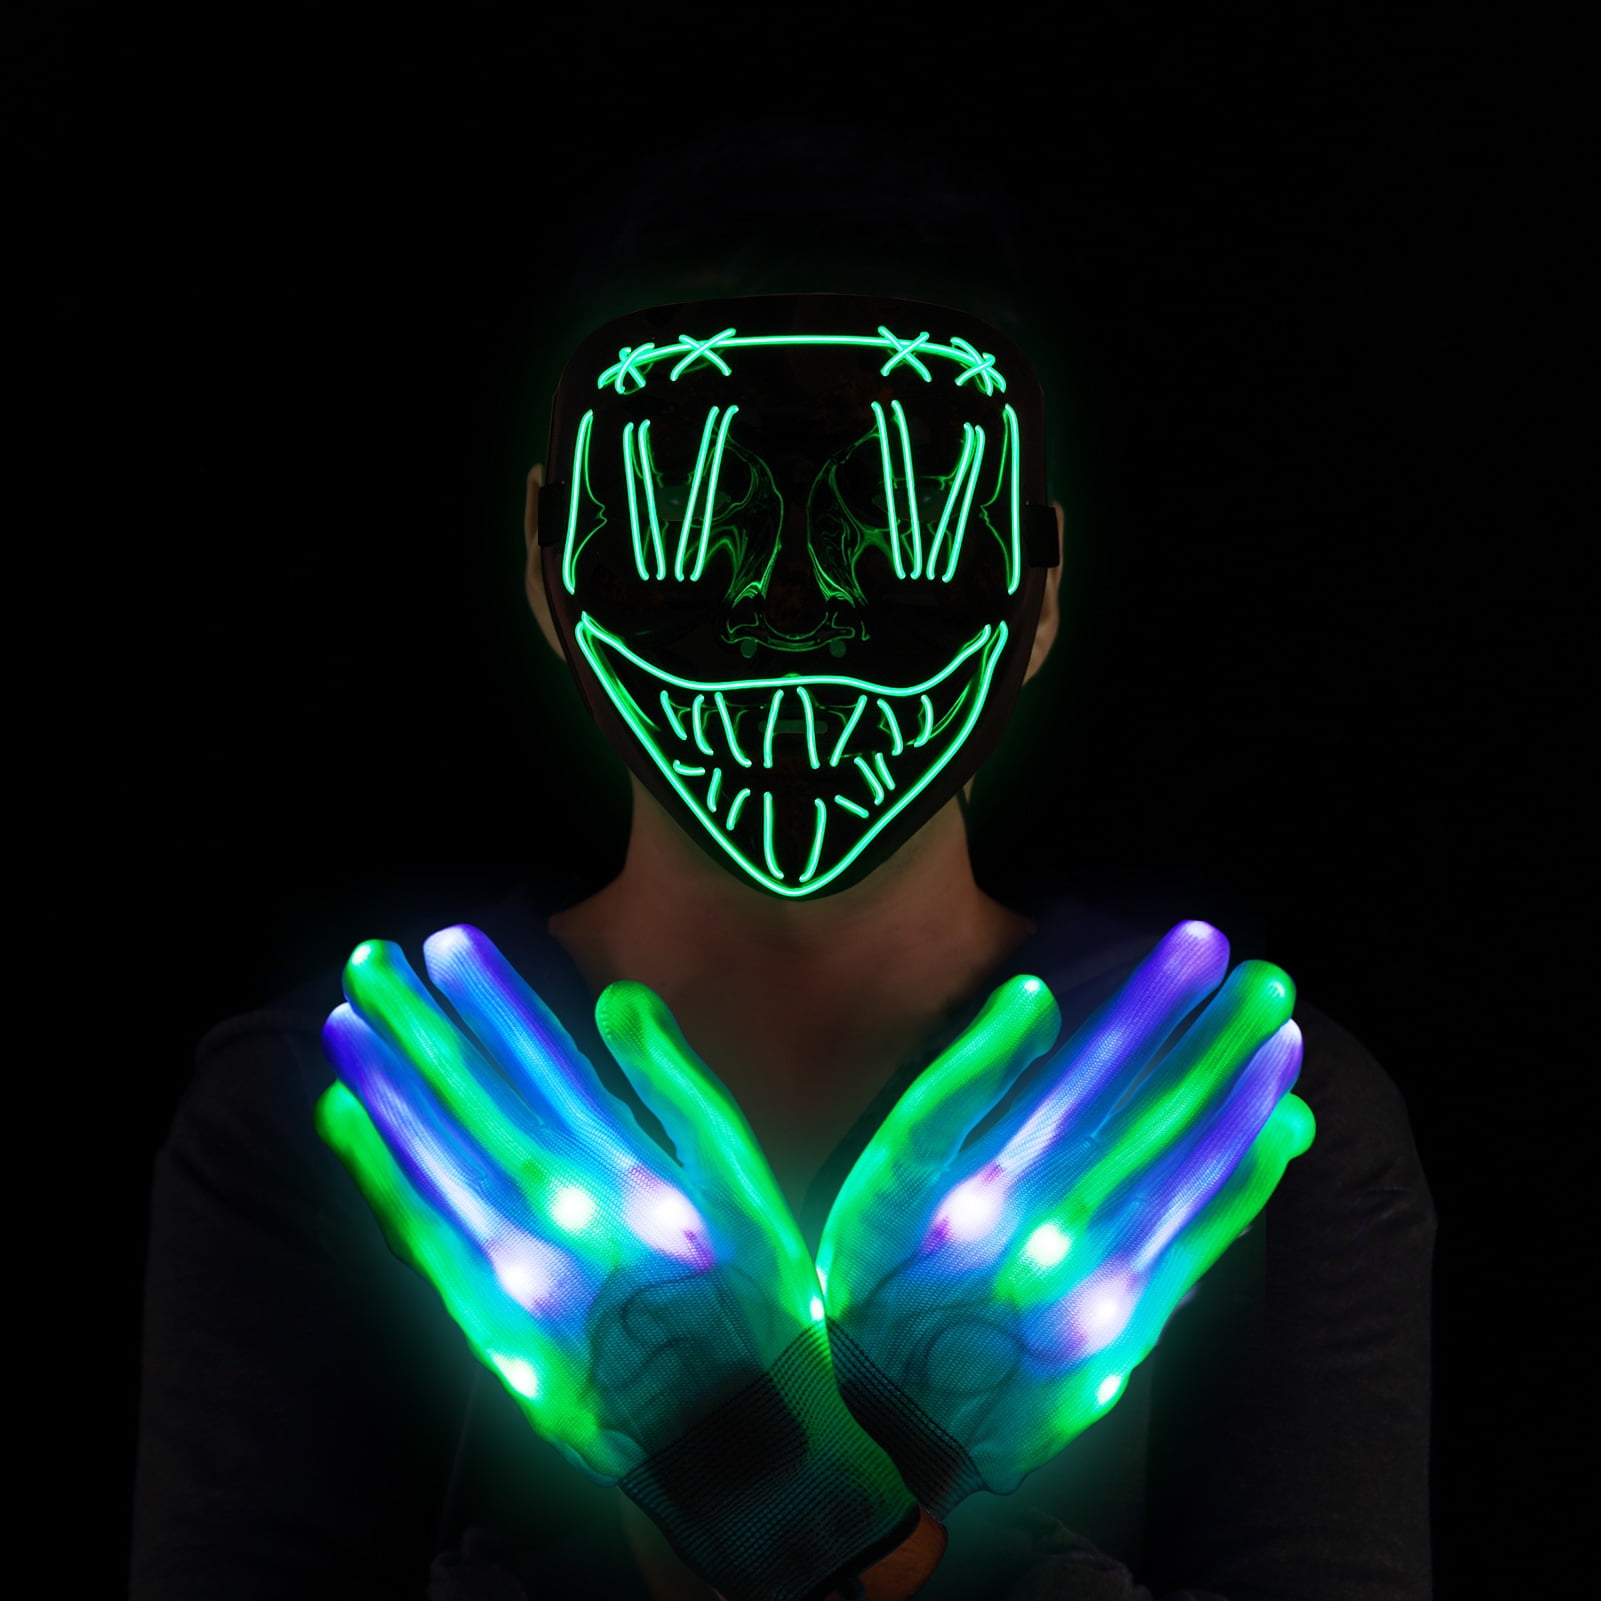 LED Mask with Light Up Gloves Kit, Led Flashing Mask Party Supplies for Halloween Festival Novelty and Creepy Cosplay Costume - Walmart.com